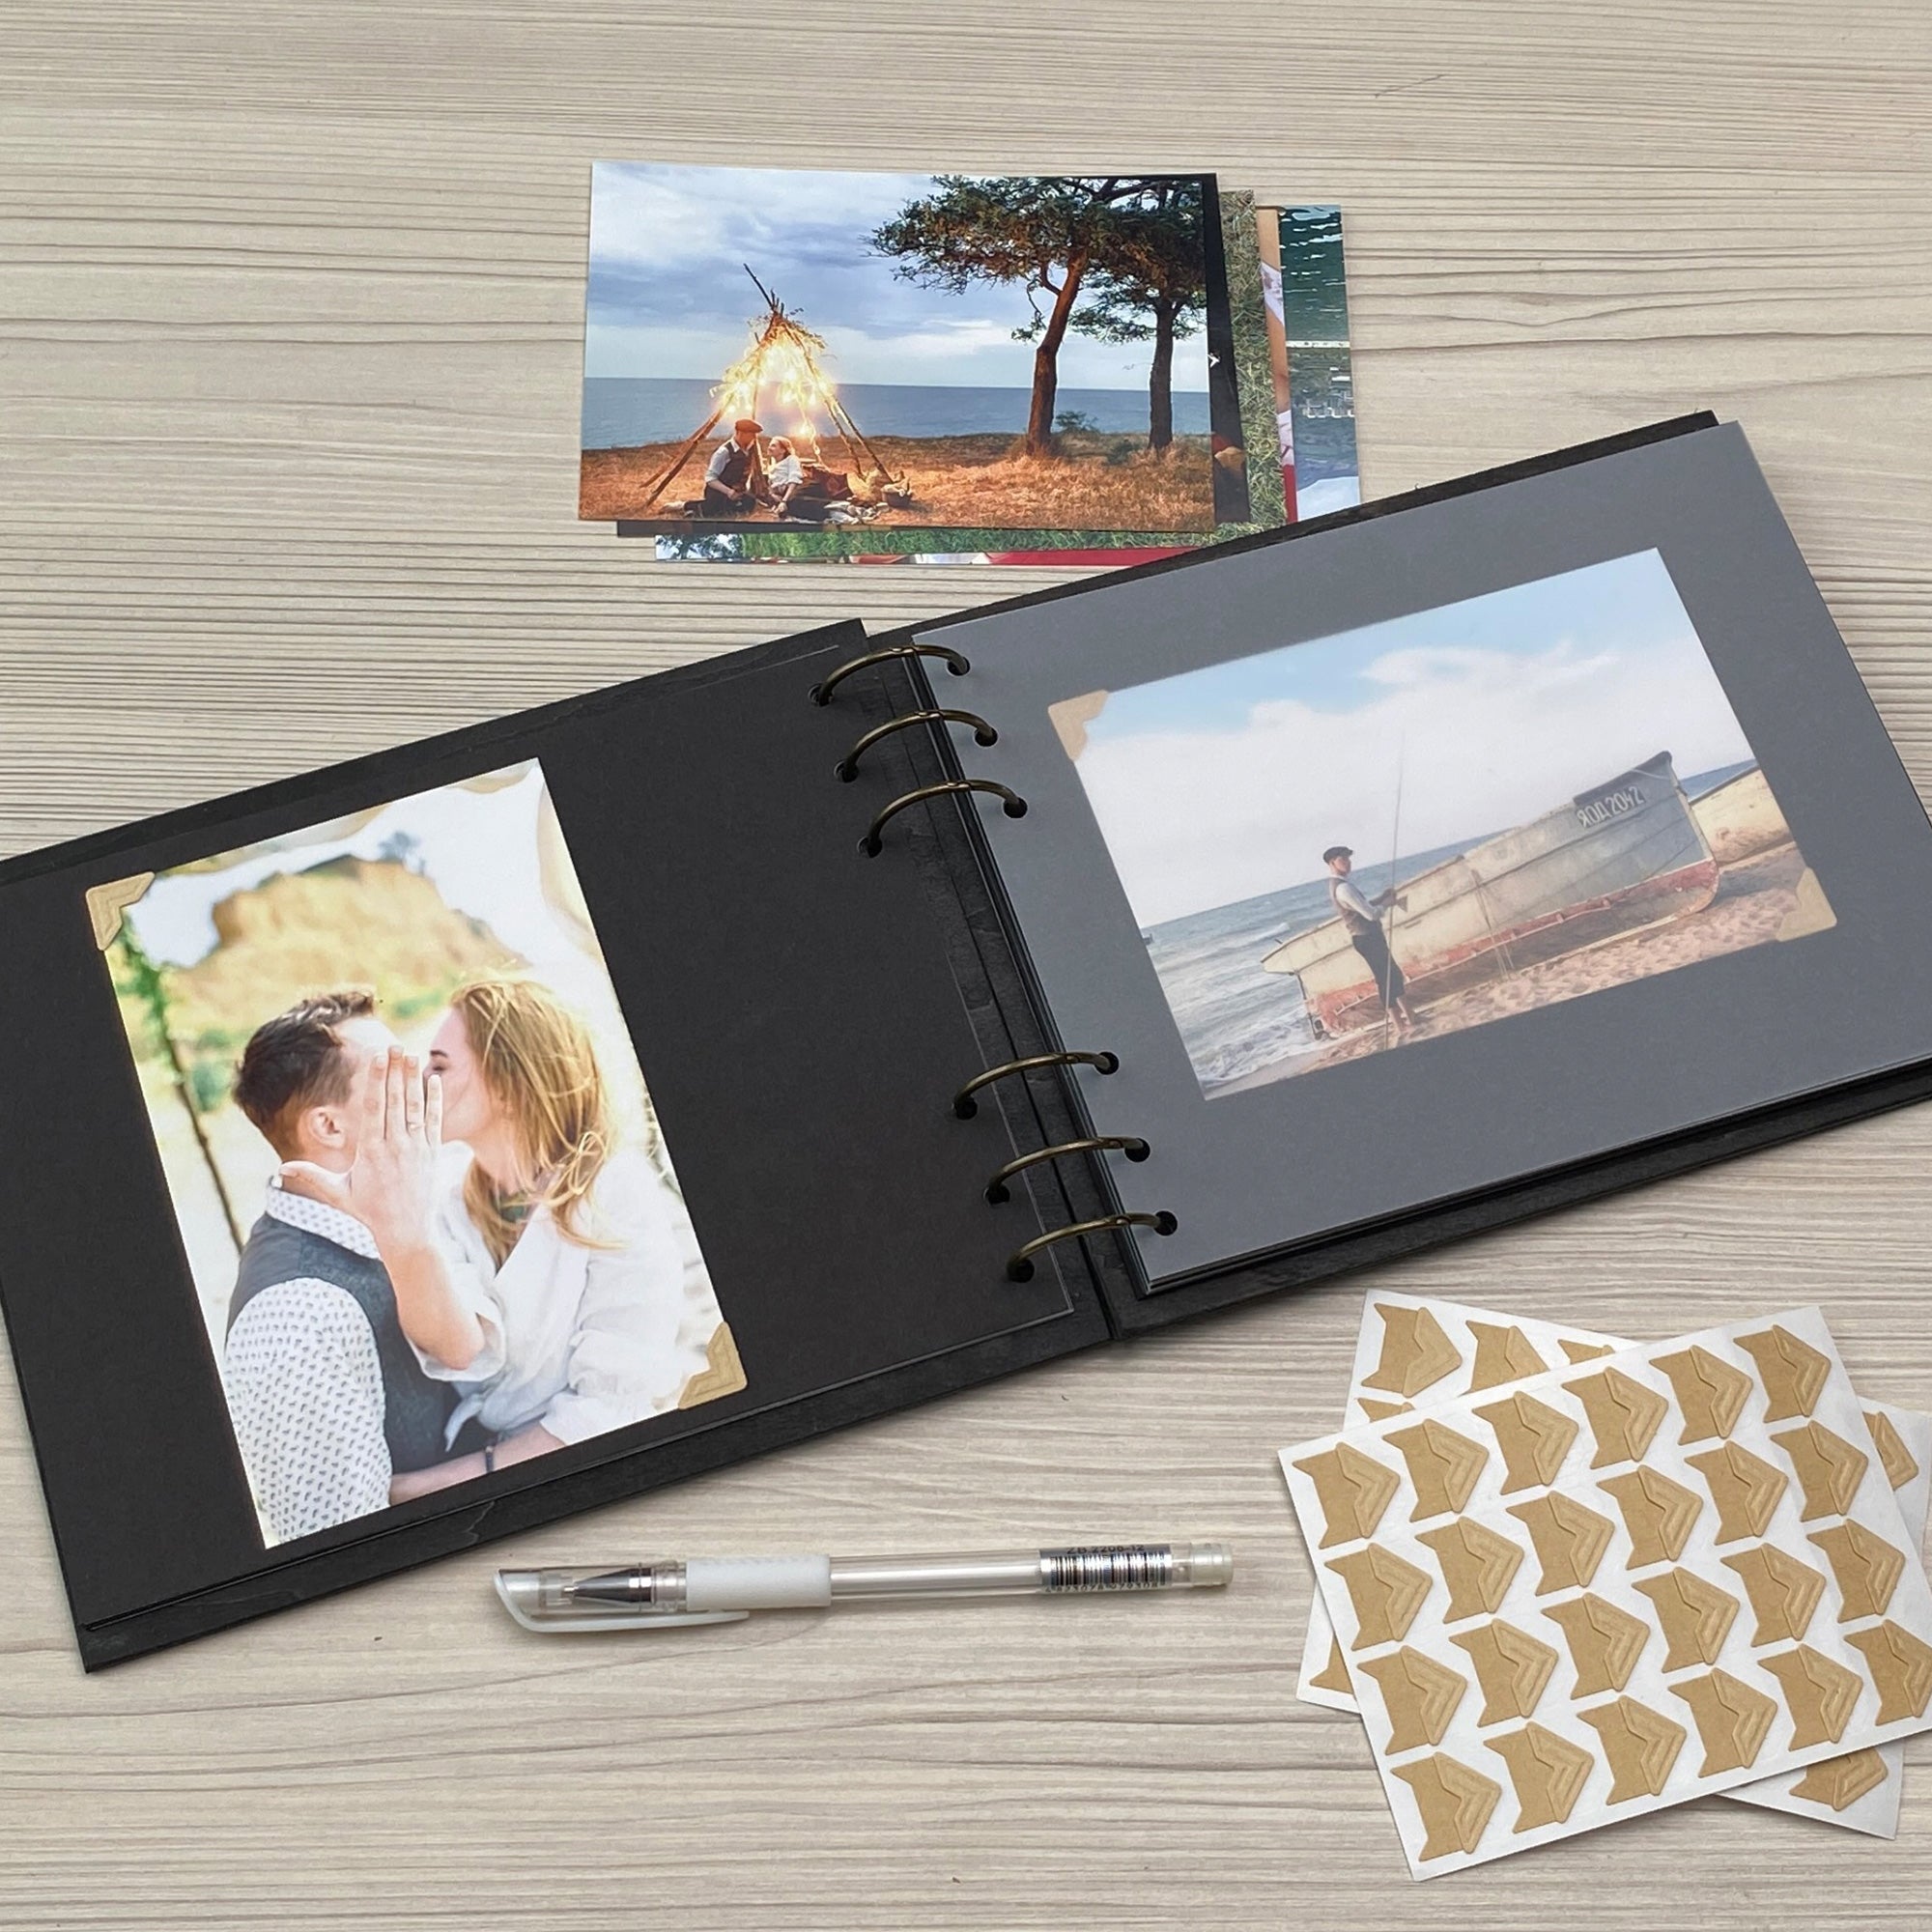 Personalized photo album cover and Flower wreath engraving